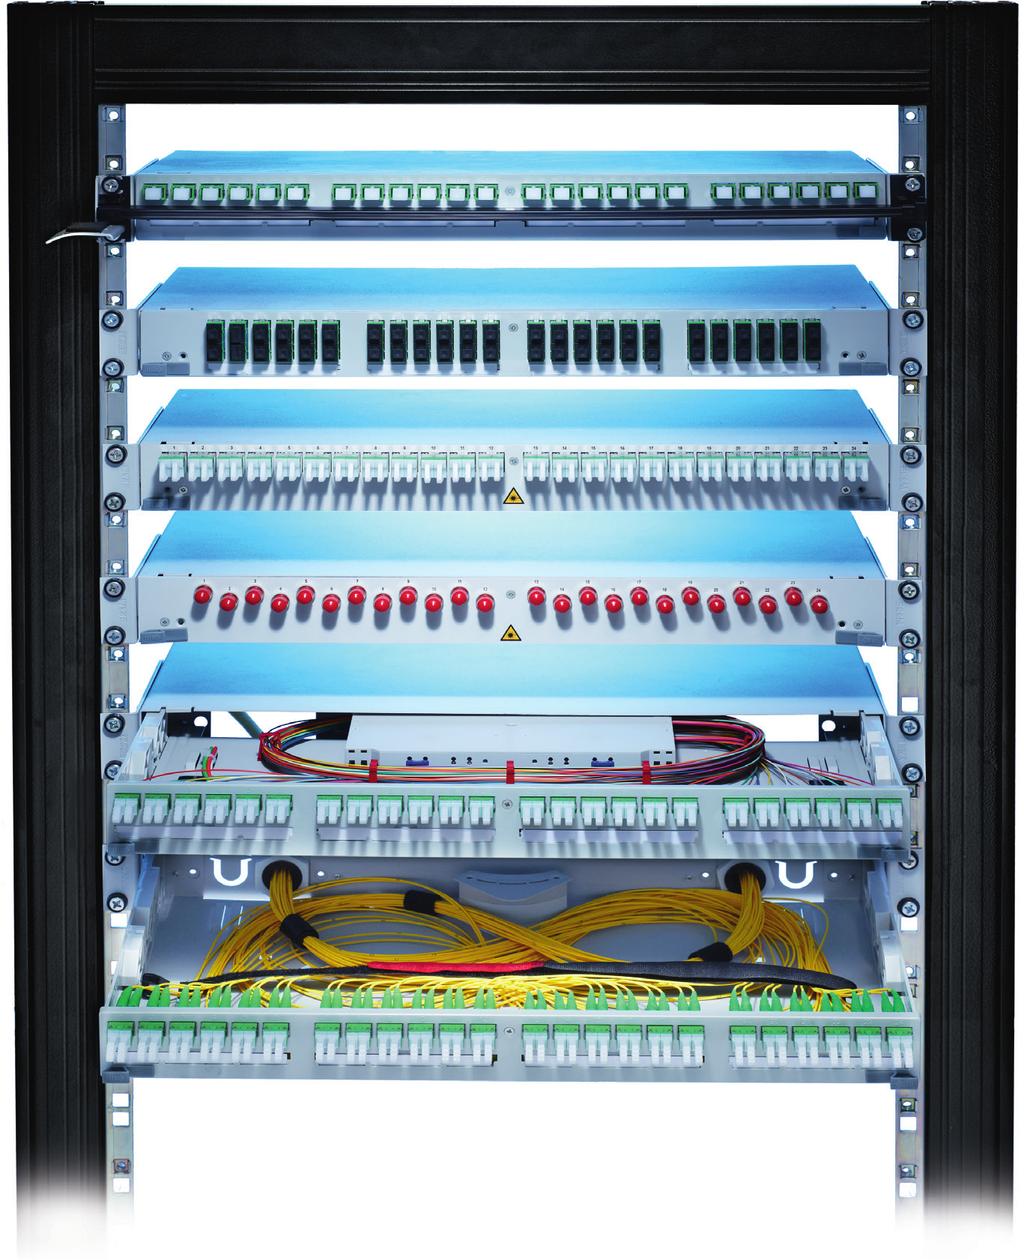 Now there is just one basic module for cable terminationin 19 racks. In the FibereasyRack 2 version, the platform offers everything needed for breakout cabling.